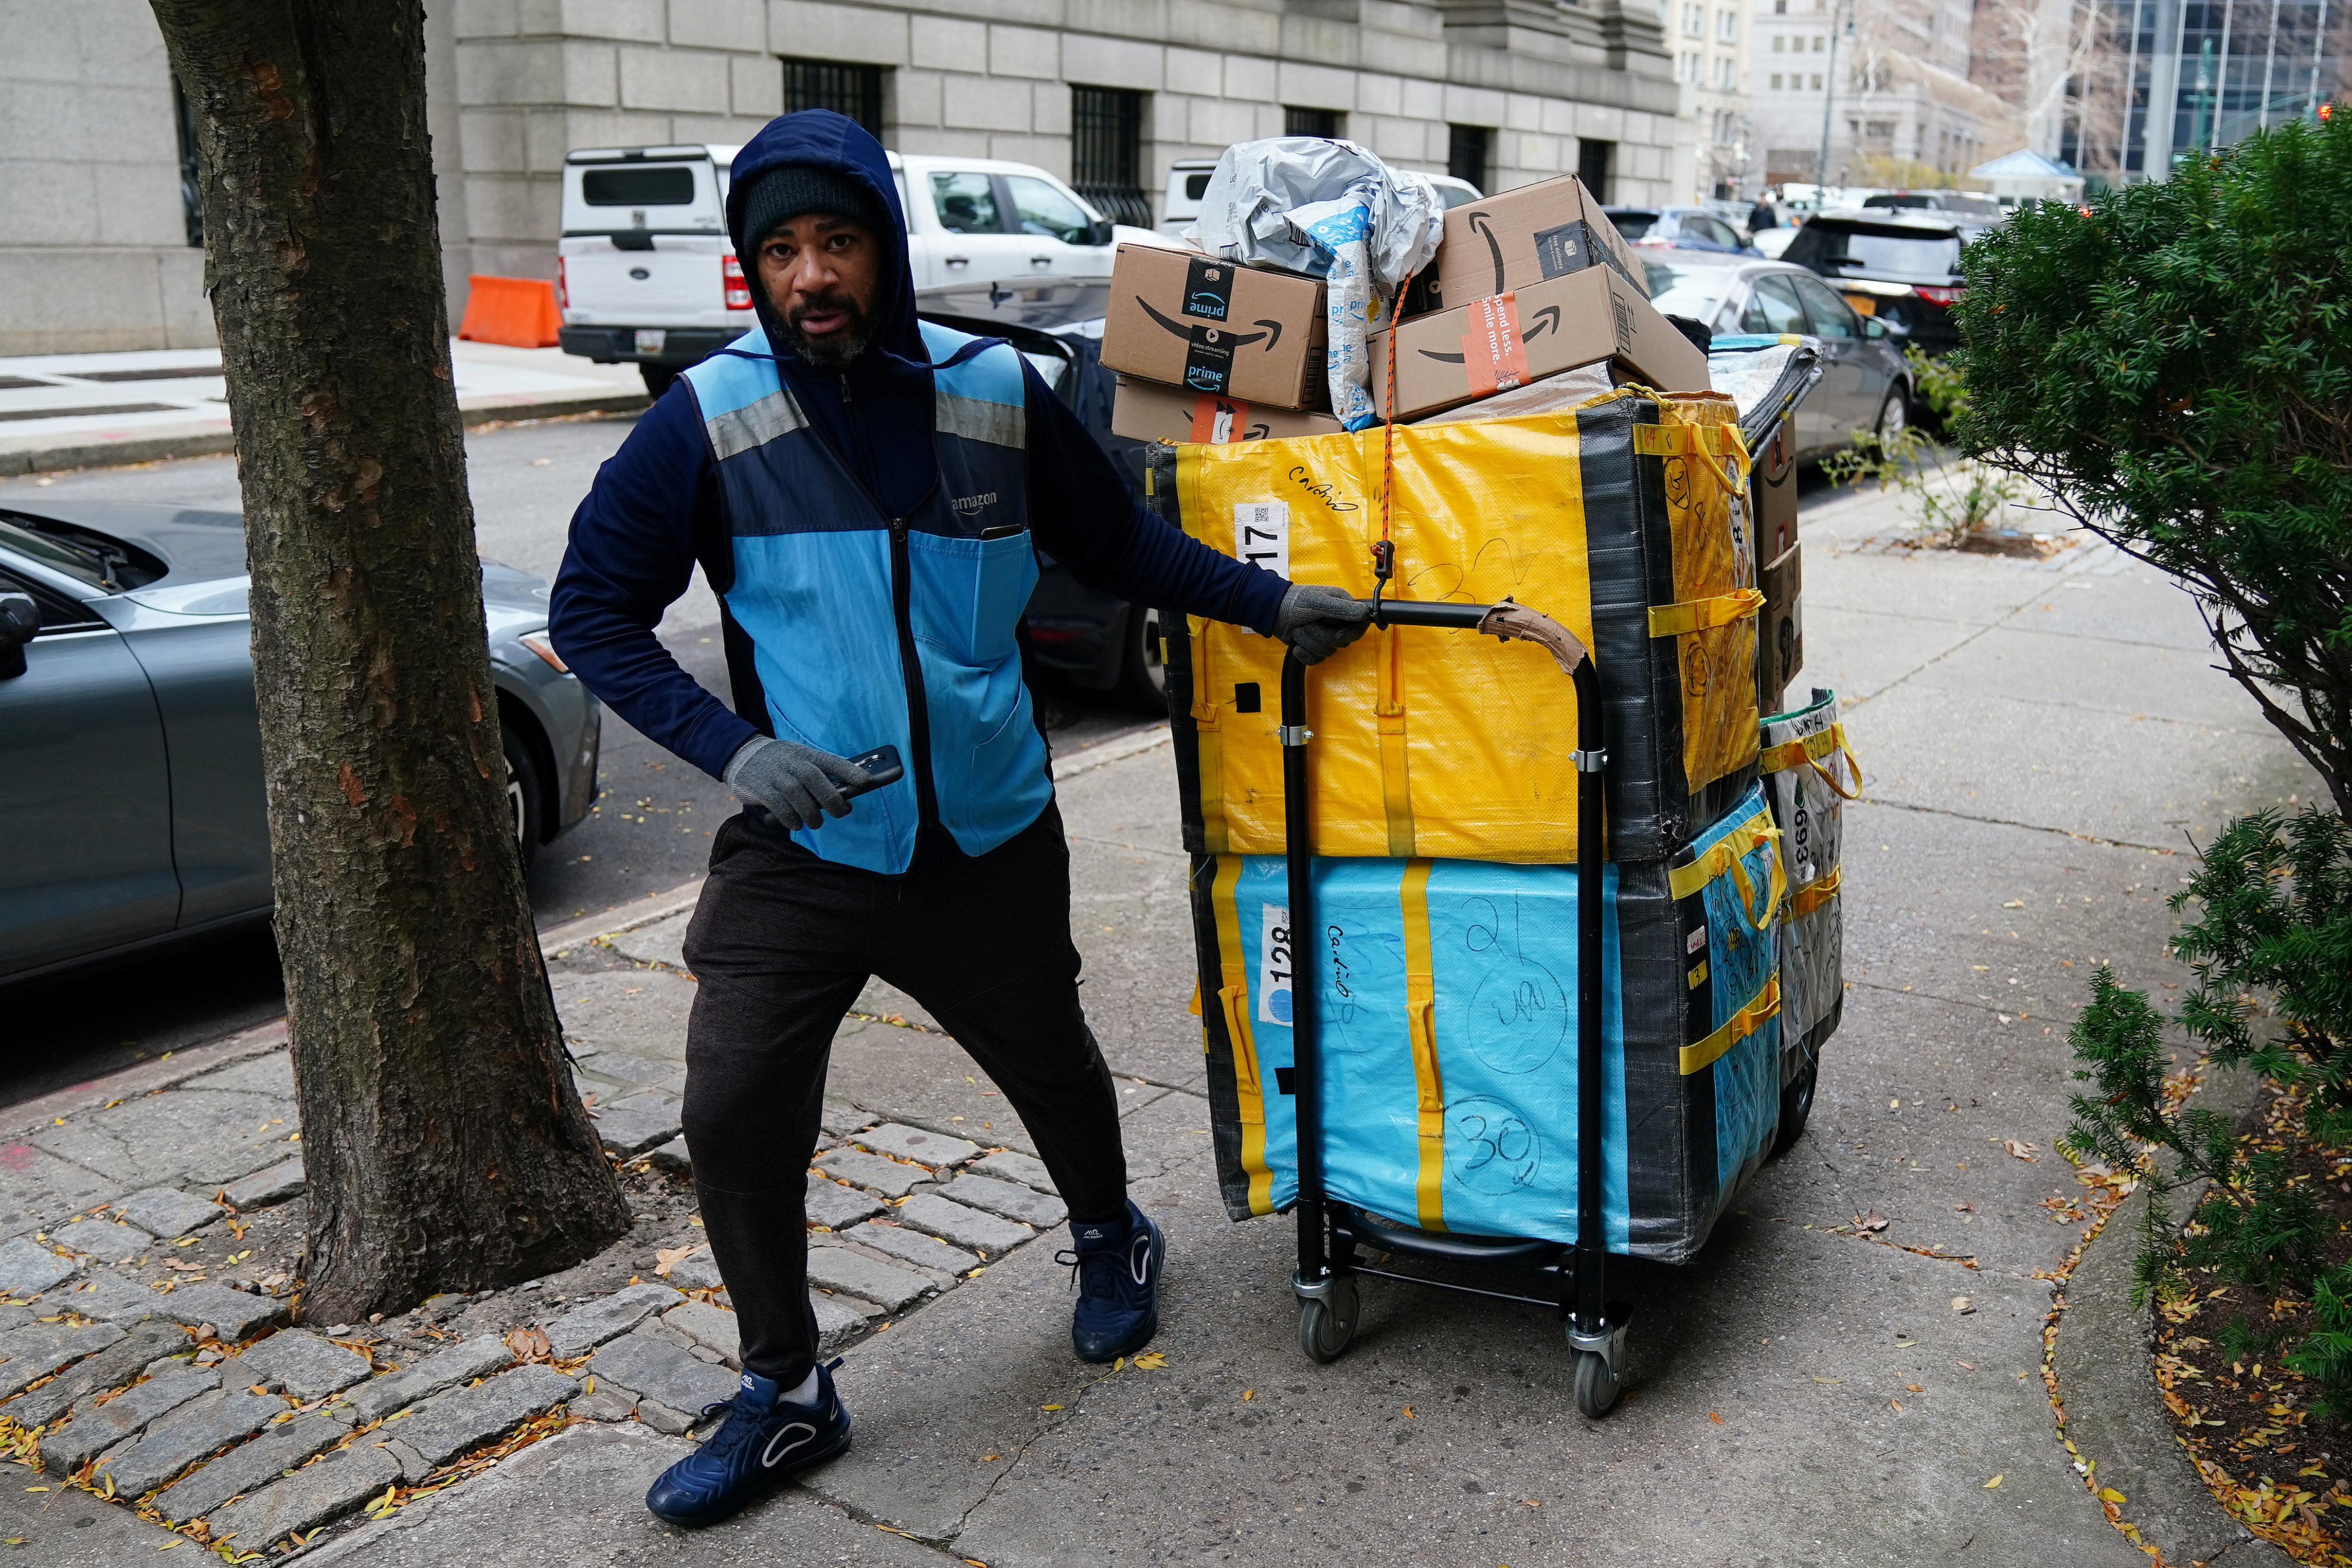 An Amazon delivery person pulls a cart full of packages in New York